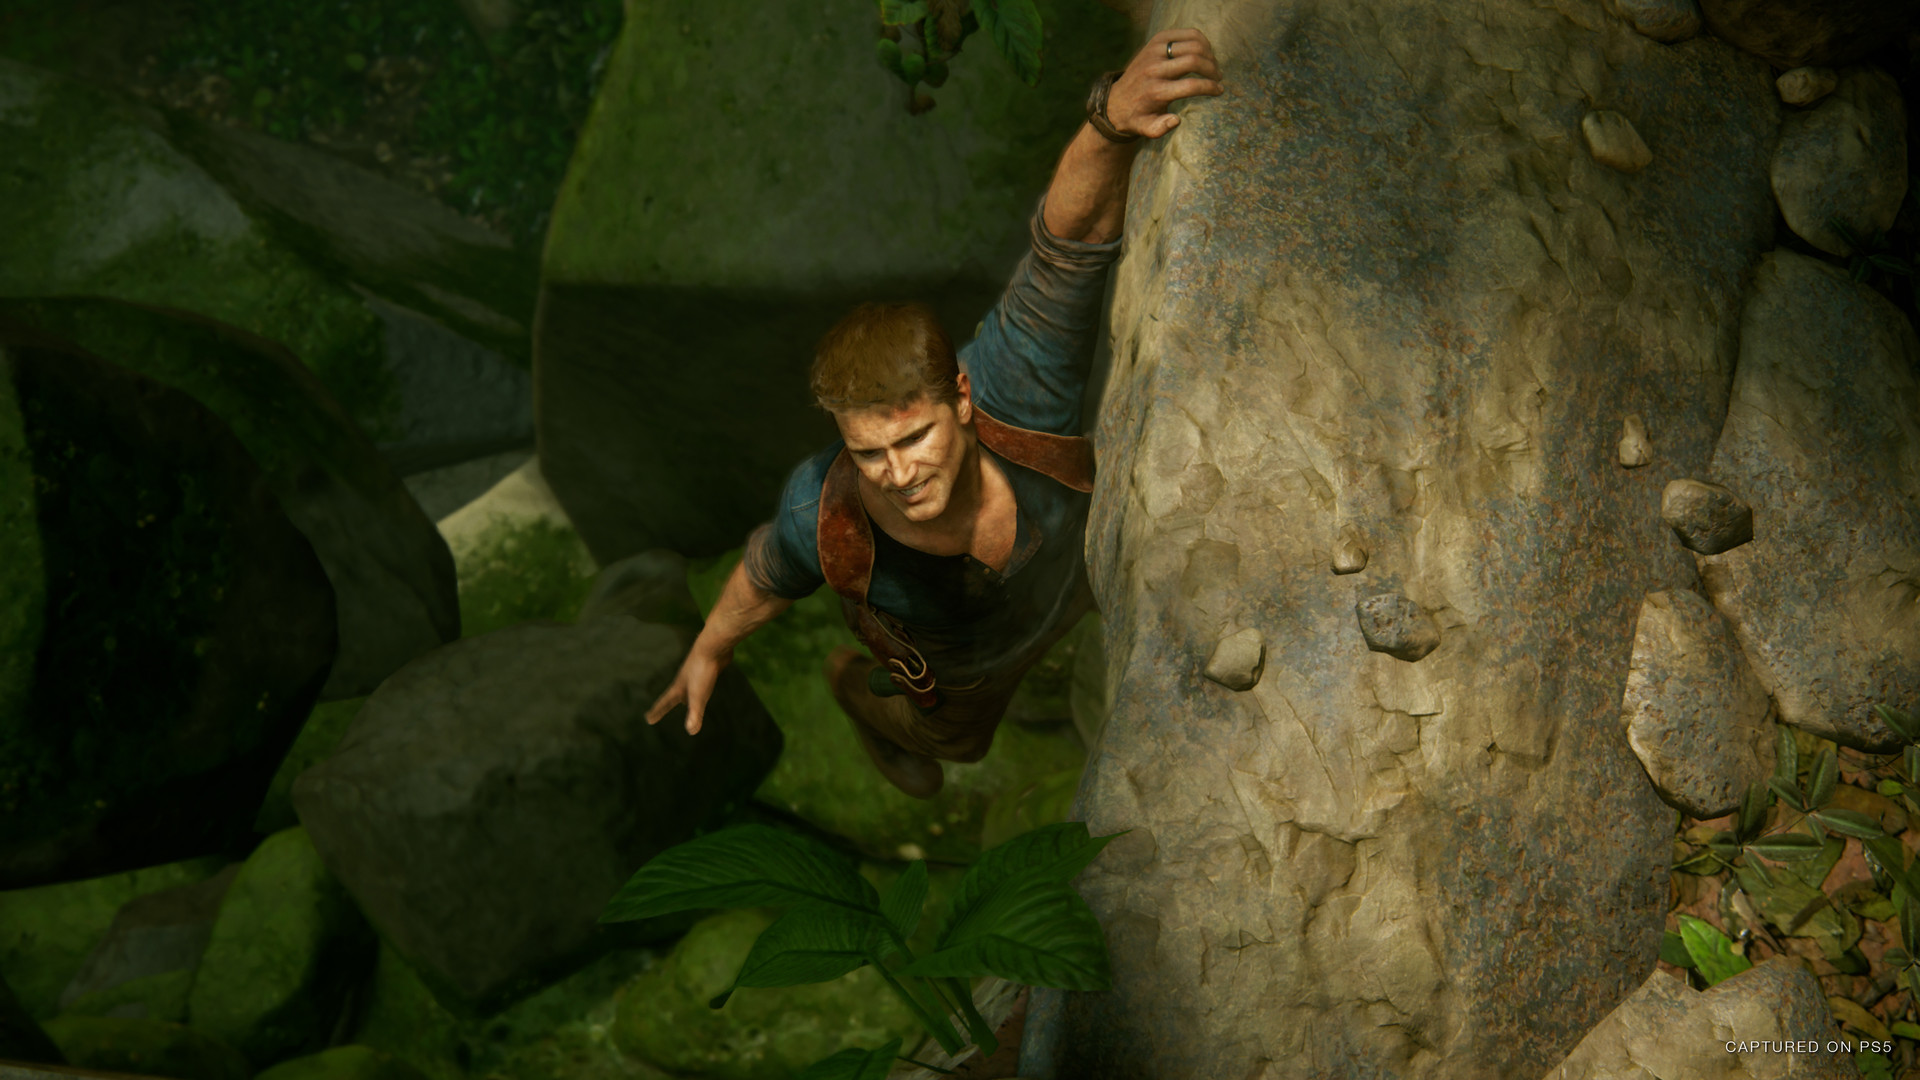 Uncharted Legacy Of Thieves Collection PC Release Date, Time, And